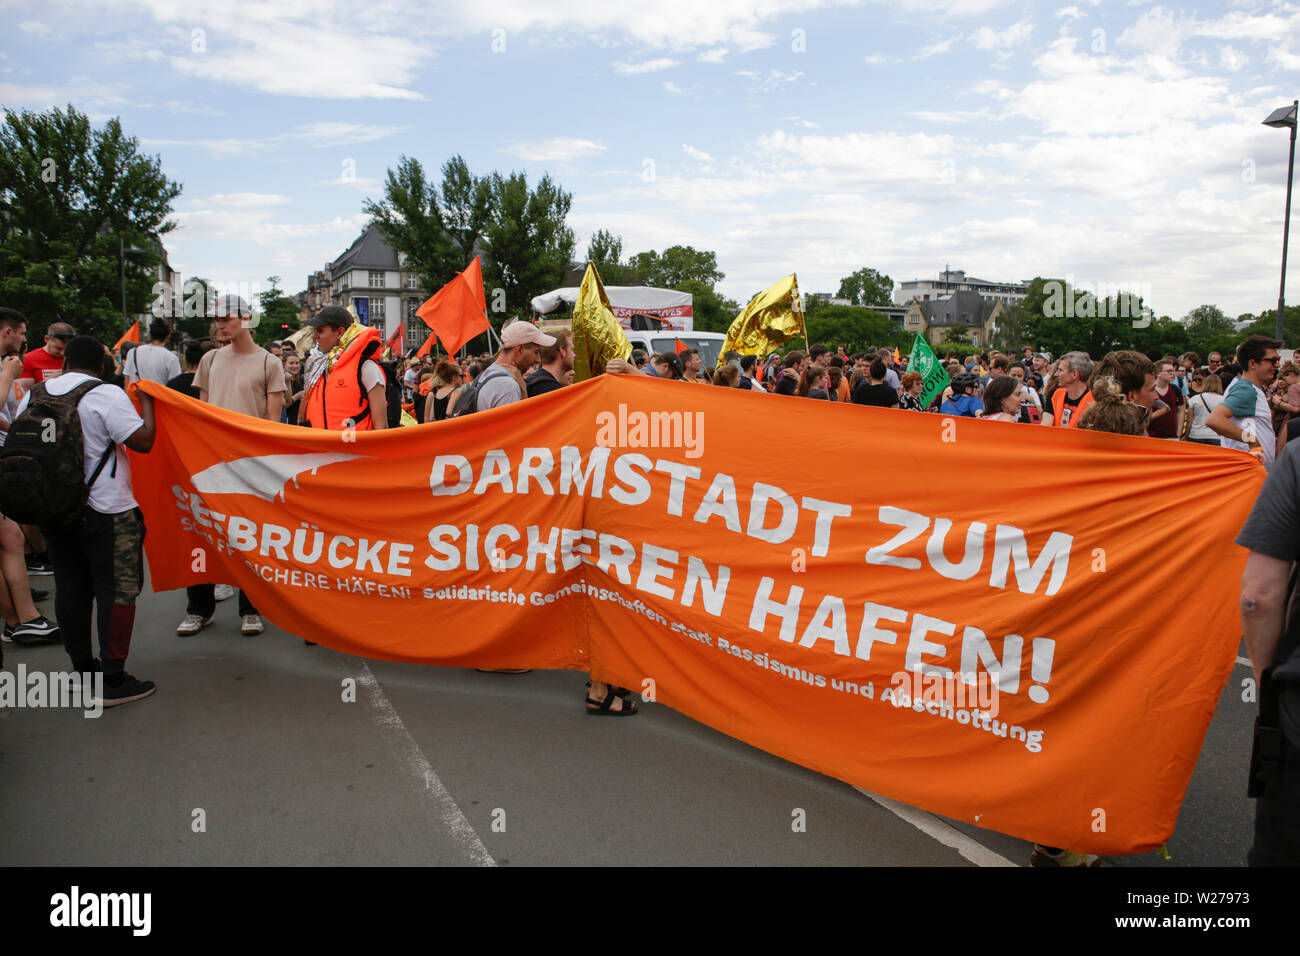 Frankfurt, Germany. 6th July 2019. Protesters carry a banner that reads  "Darmstadt as a save habour". Over 1,000 people marched through Frankfurt,  to call for save refugees routes, an end to the